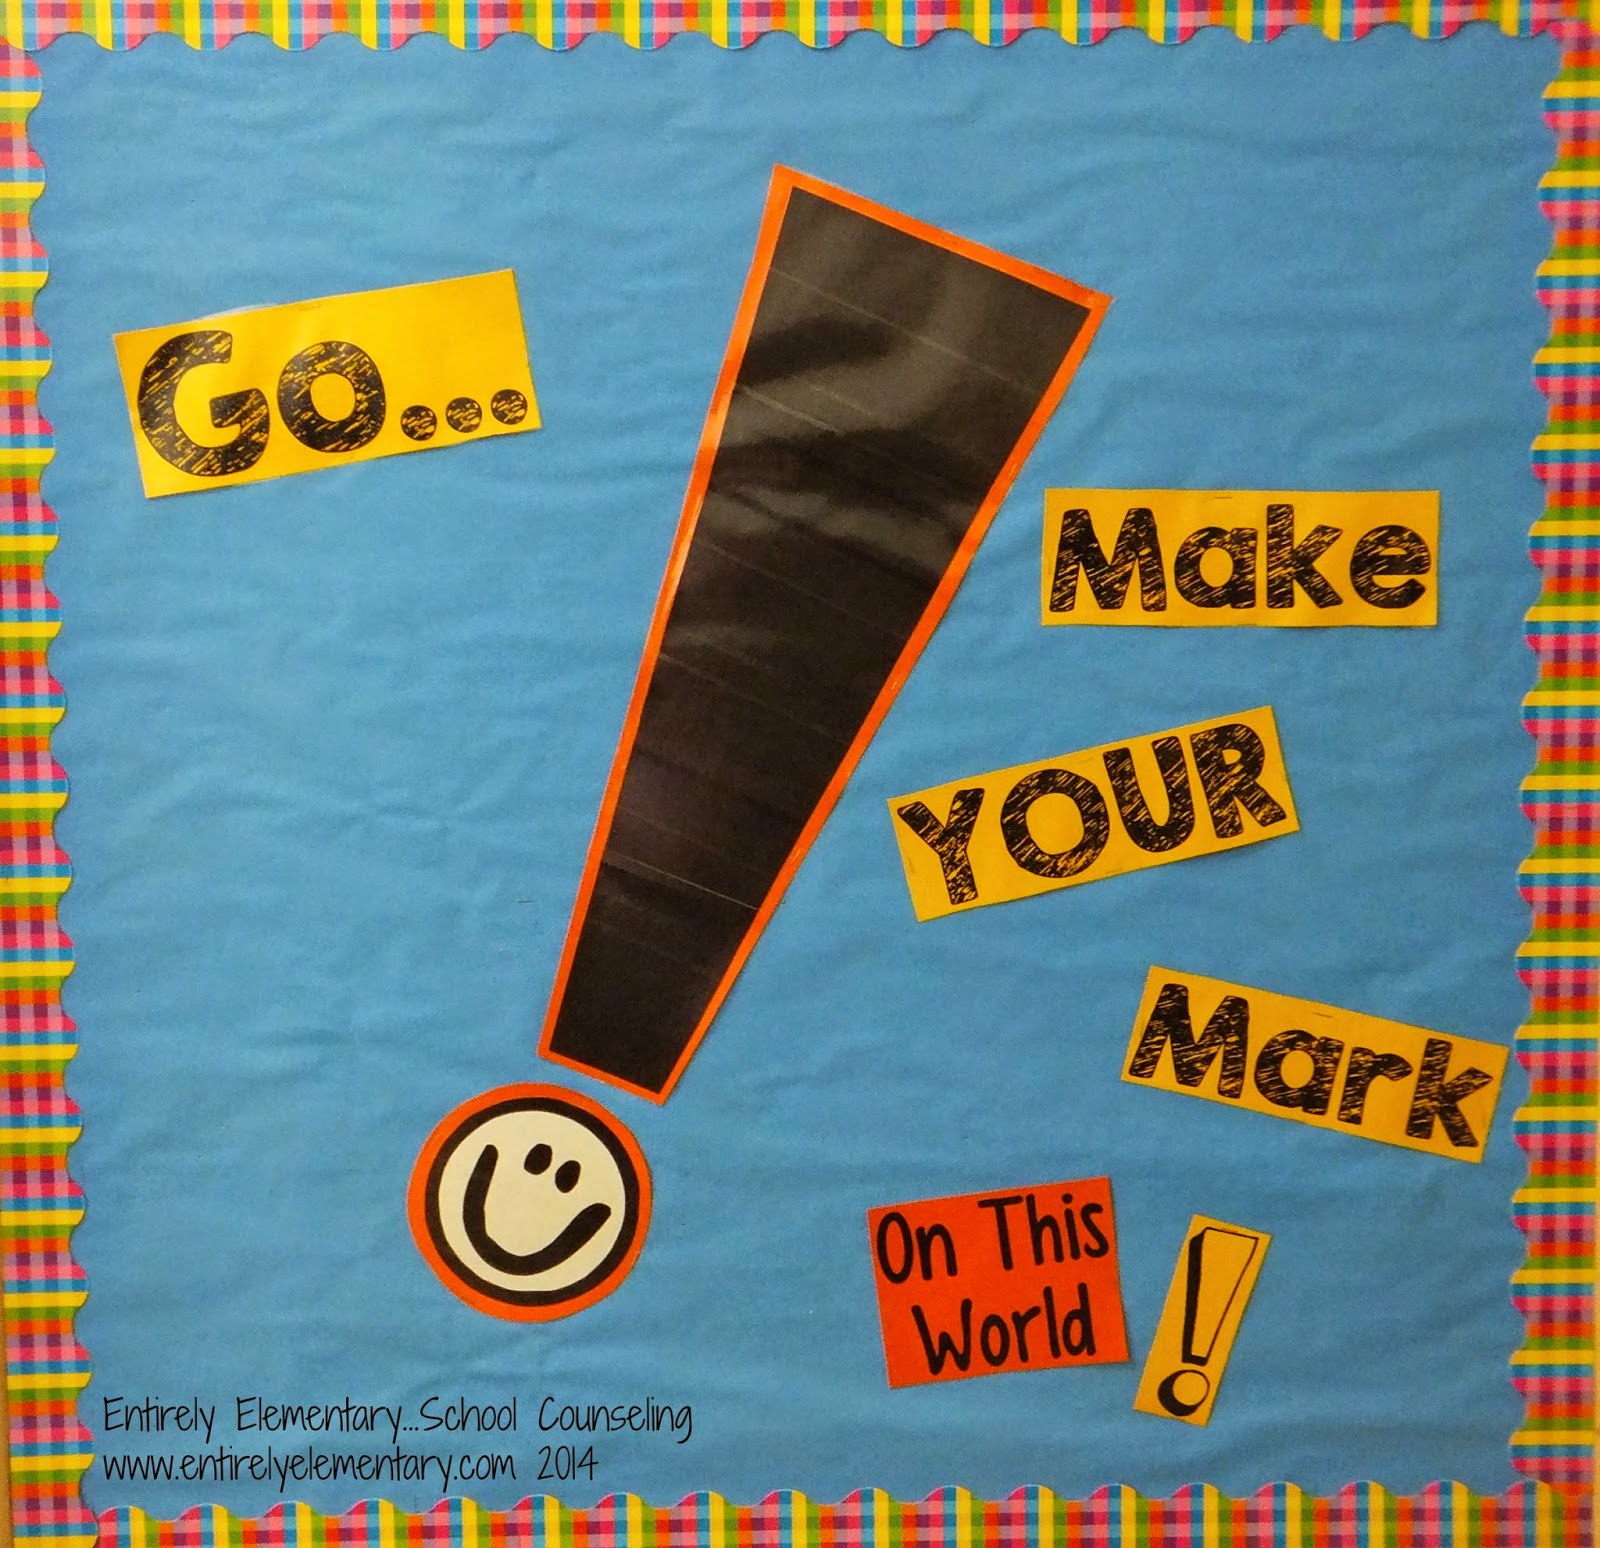 Entirely Elementary...School Counseling: Theme for 2014: Make your Mark!